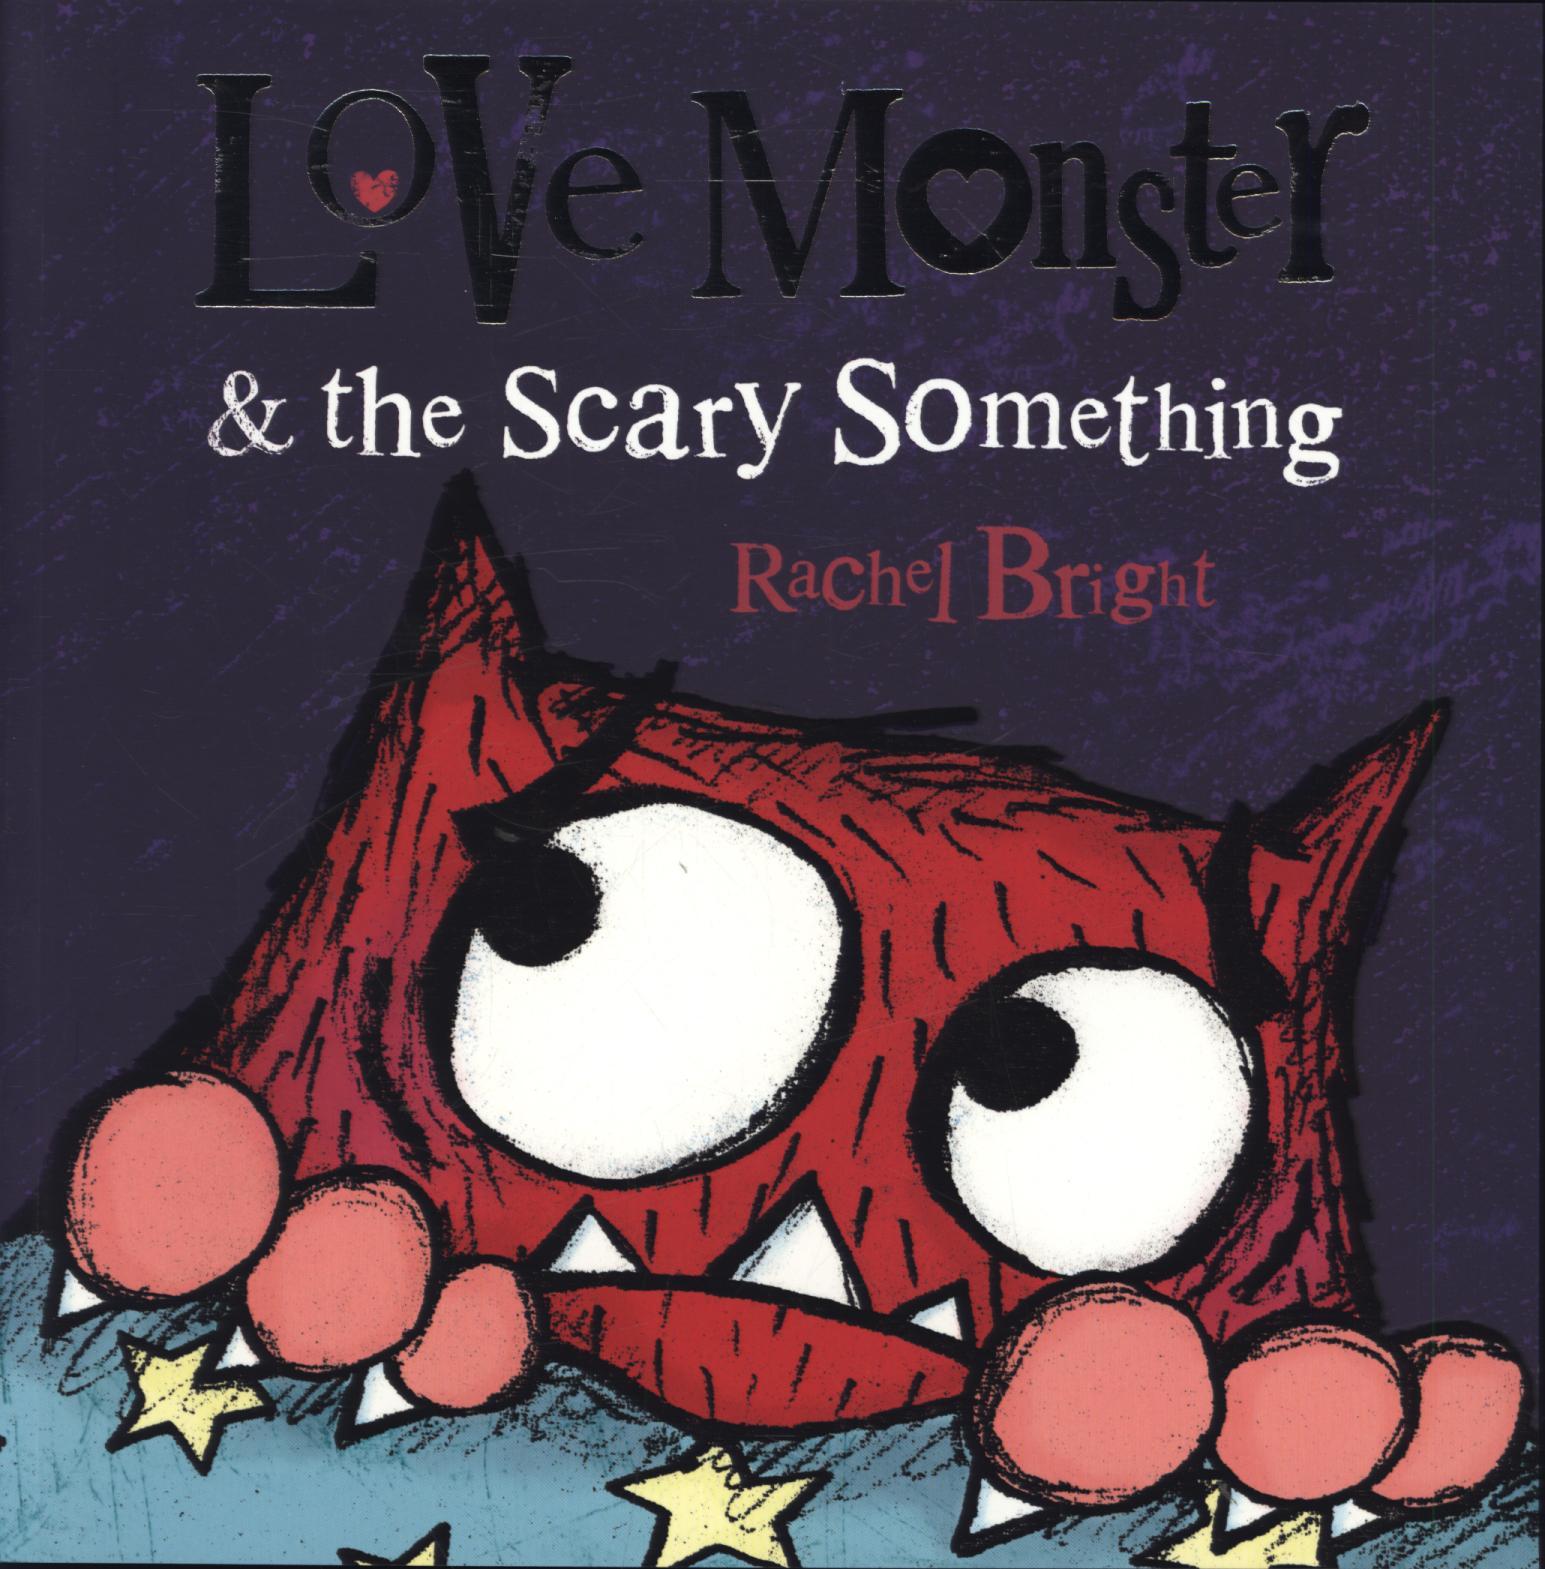 Love Monster and The Scary Something